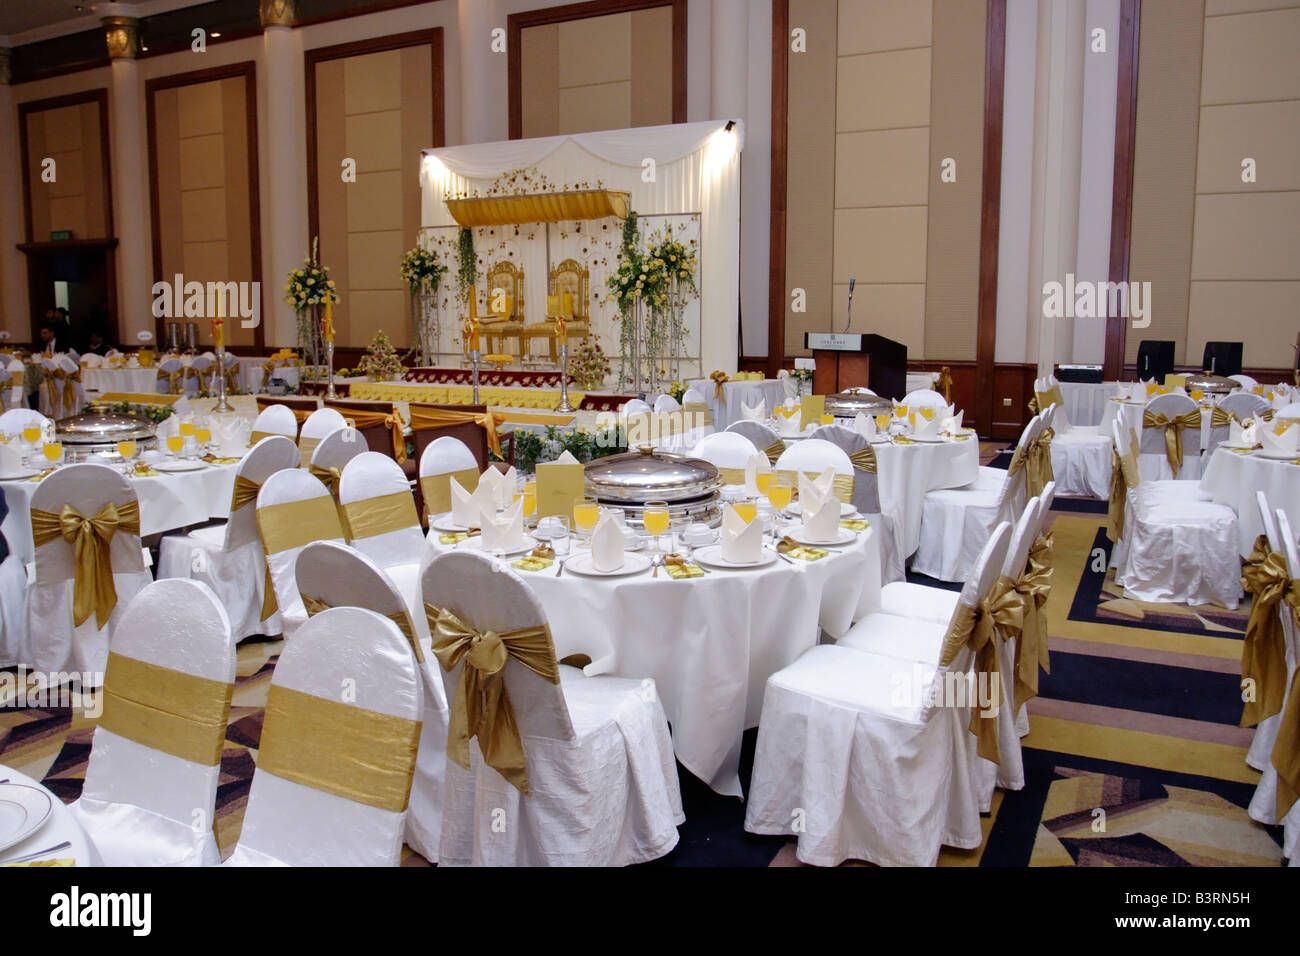 Dining tables for Malay wedding in a hotel. On the background is the dais for the wedding. Stock Photo